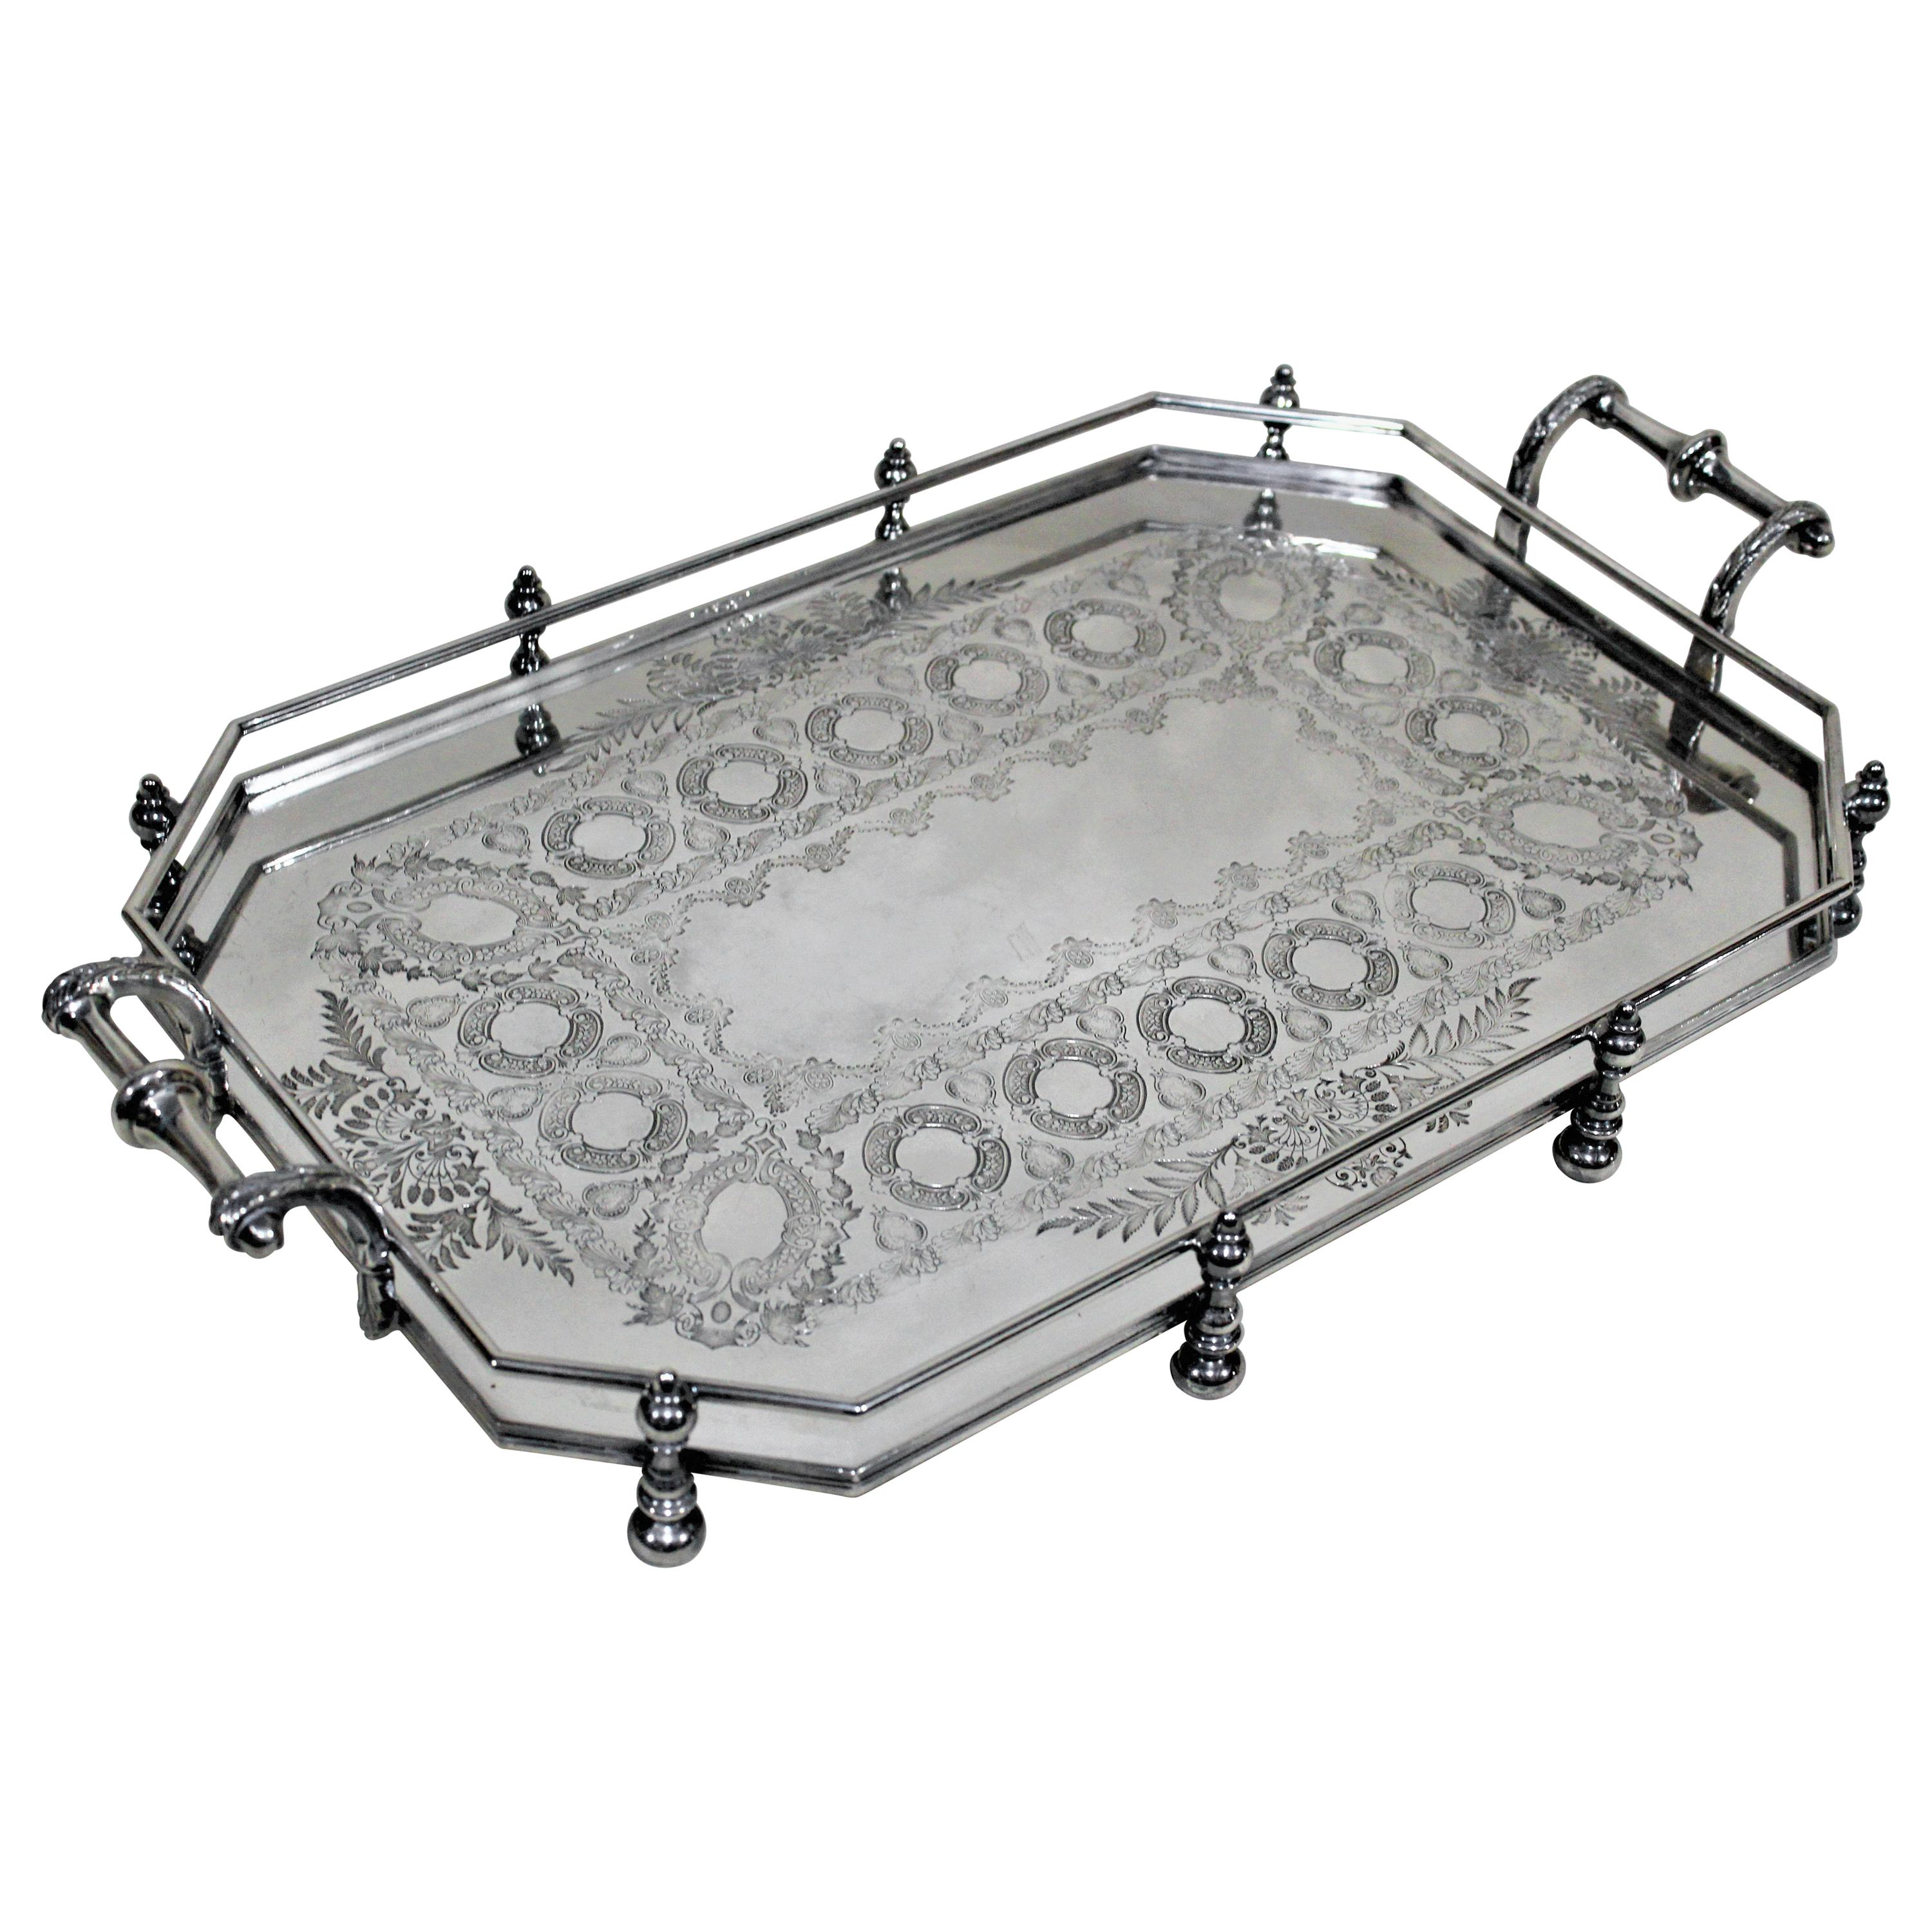 Antique Victorian Silver Plated Gallery Serving Tray Sheffield, England